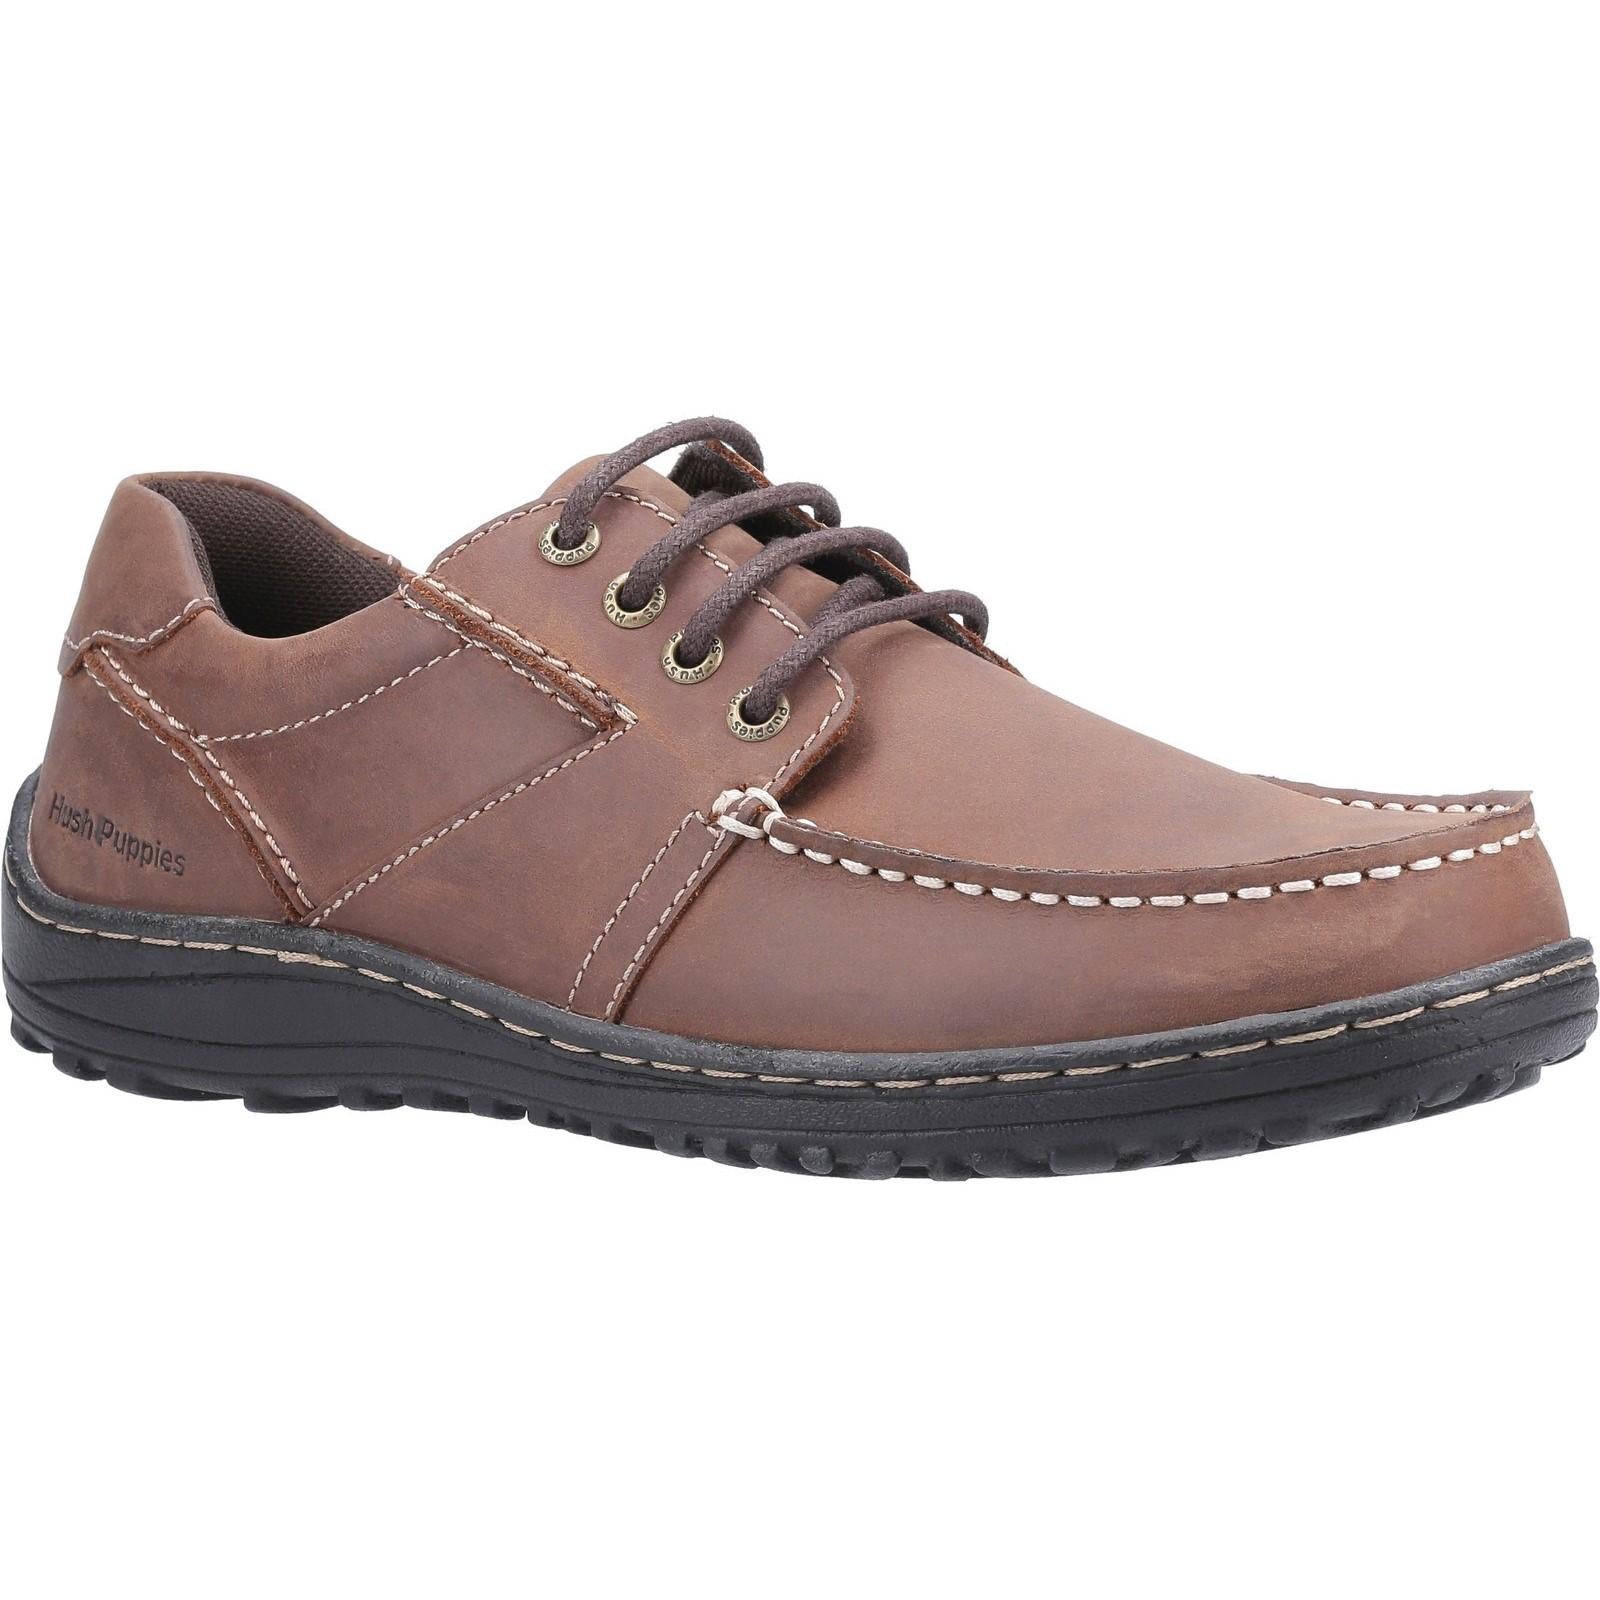 Hush Puppies Theo Lace Up Moccasin Shoes